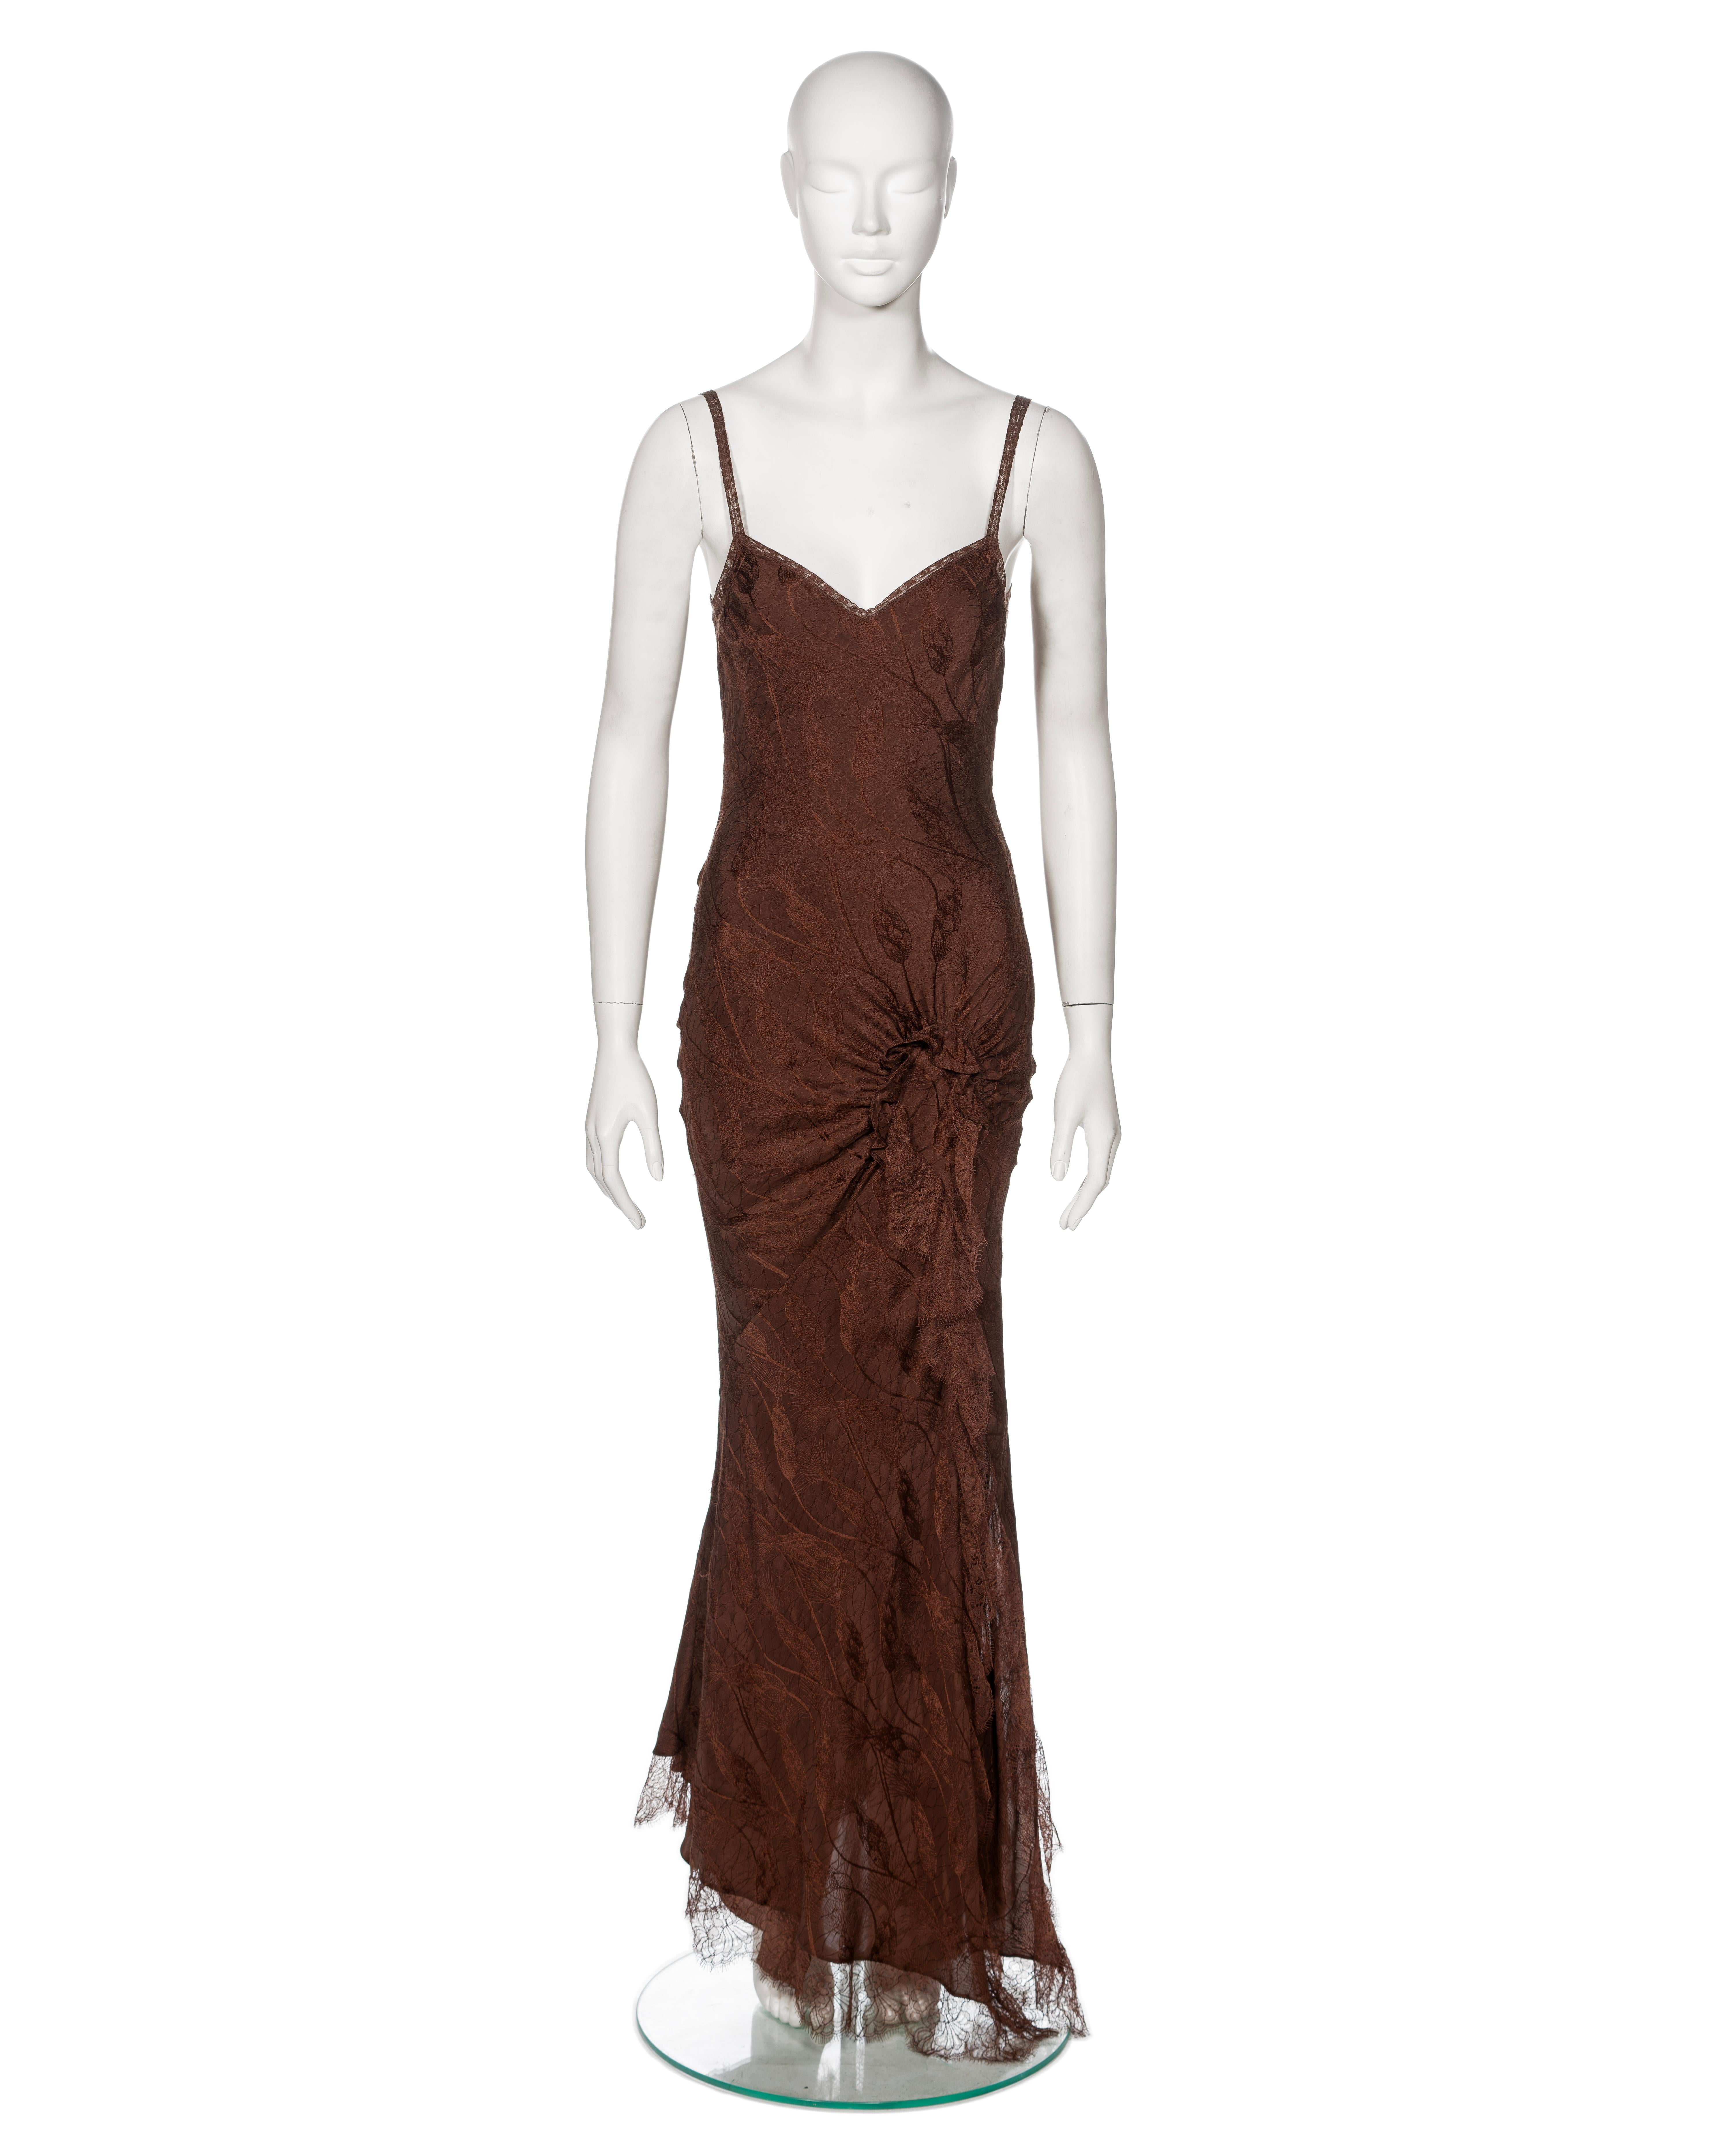 ▪ Brand: John Galliano
▪ Creative Director: John Galliano
▪ Collection: Fall-Winter 2005
▪ Sold by: One of a Kind Archive
▪ Fabric: Brown Silk, Cotton, Tactel, Nylon
▪ Size: FR38 - UK10 - IT42
▪ Made in: France
▪ Condition: Very Good
▪ Mannequin: